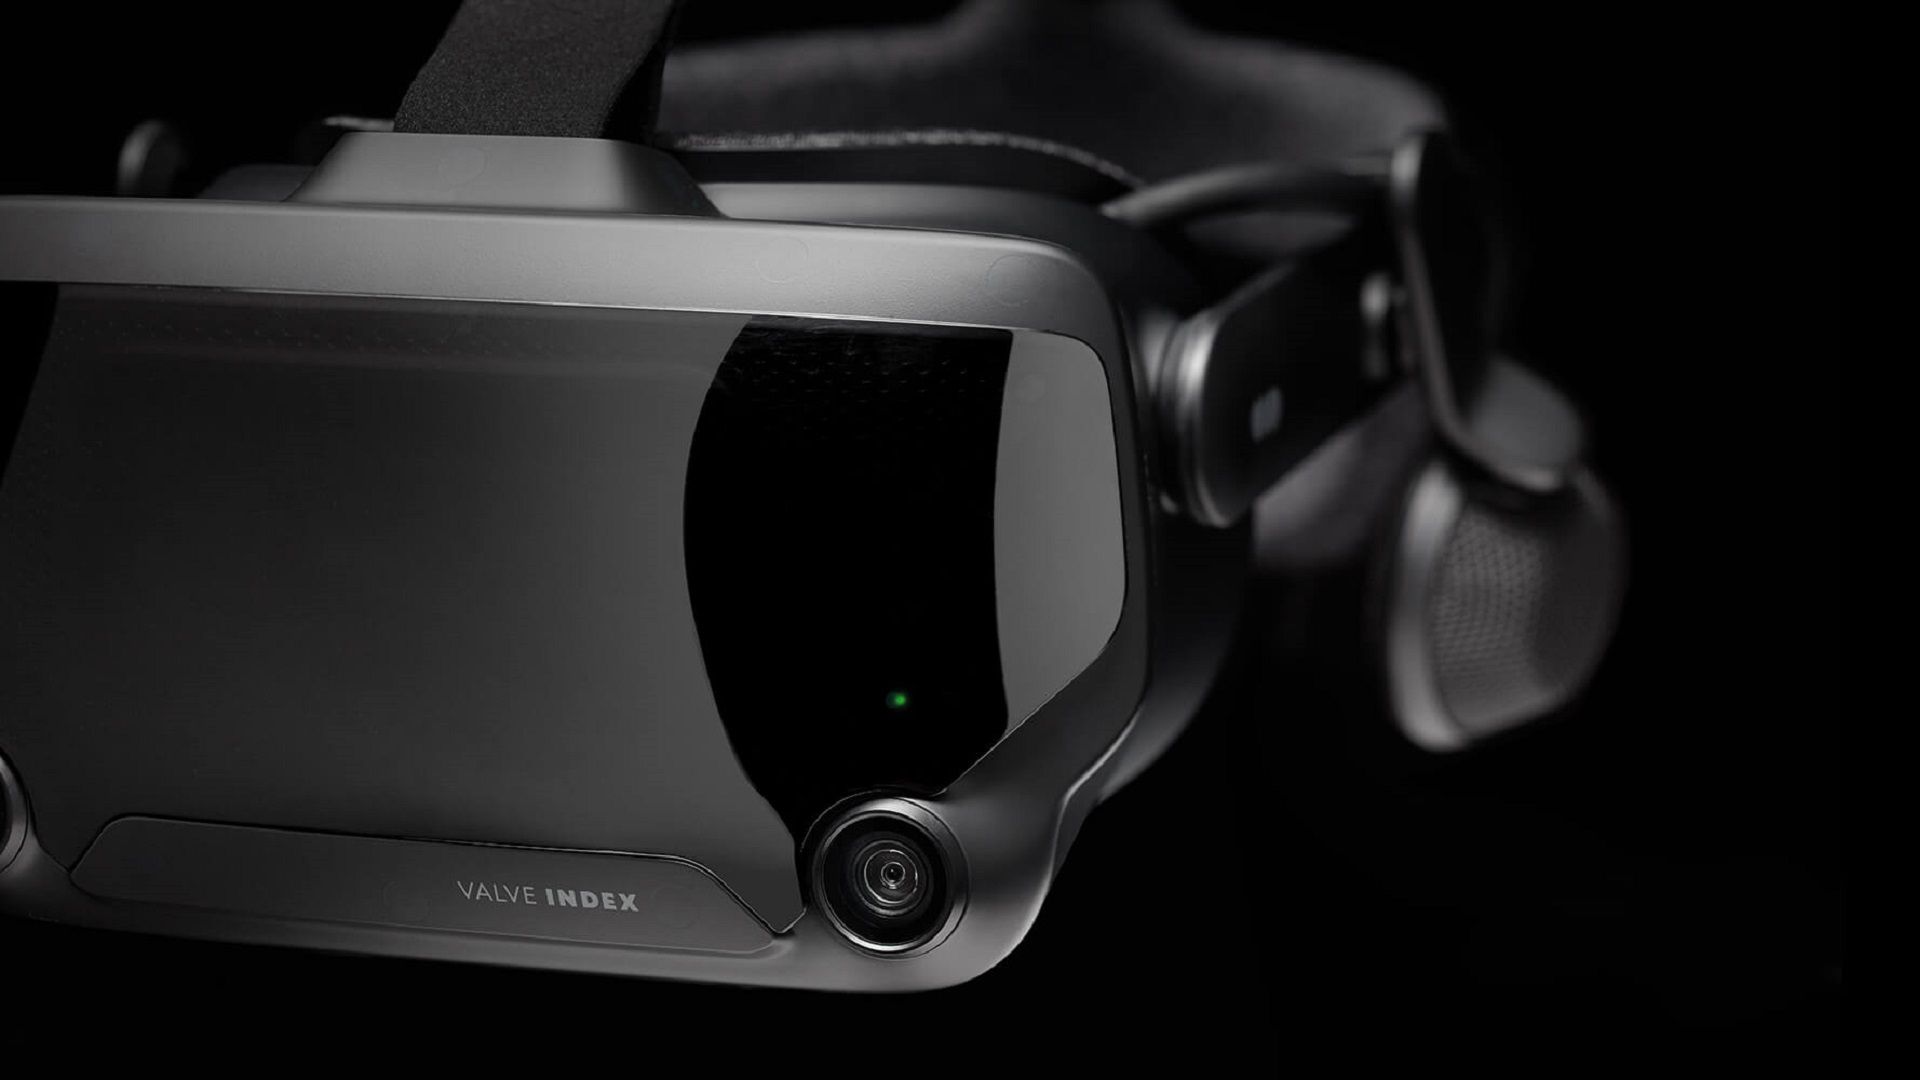 Valve Index Vr Headset Everything You Need To Know image 2